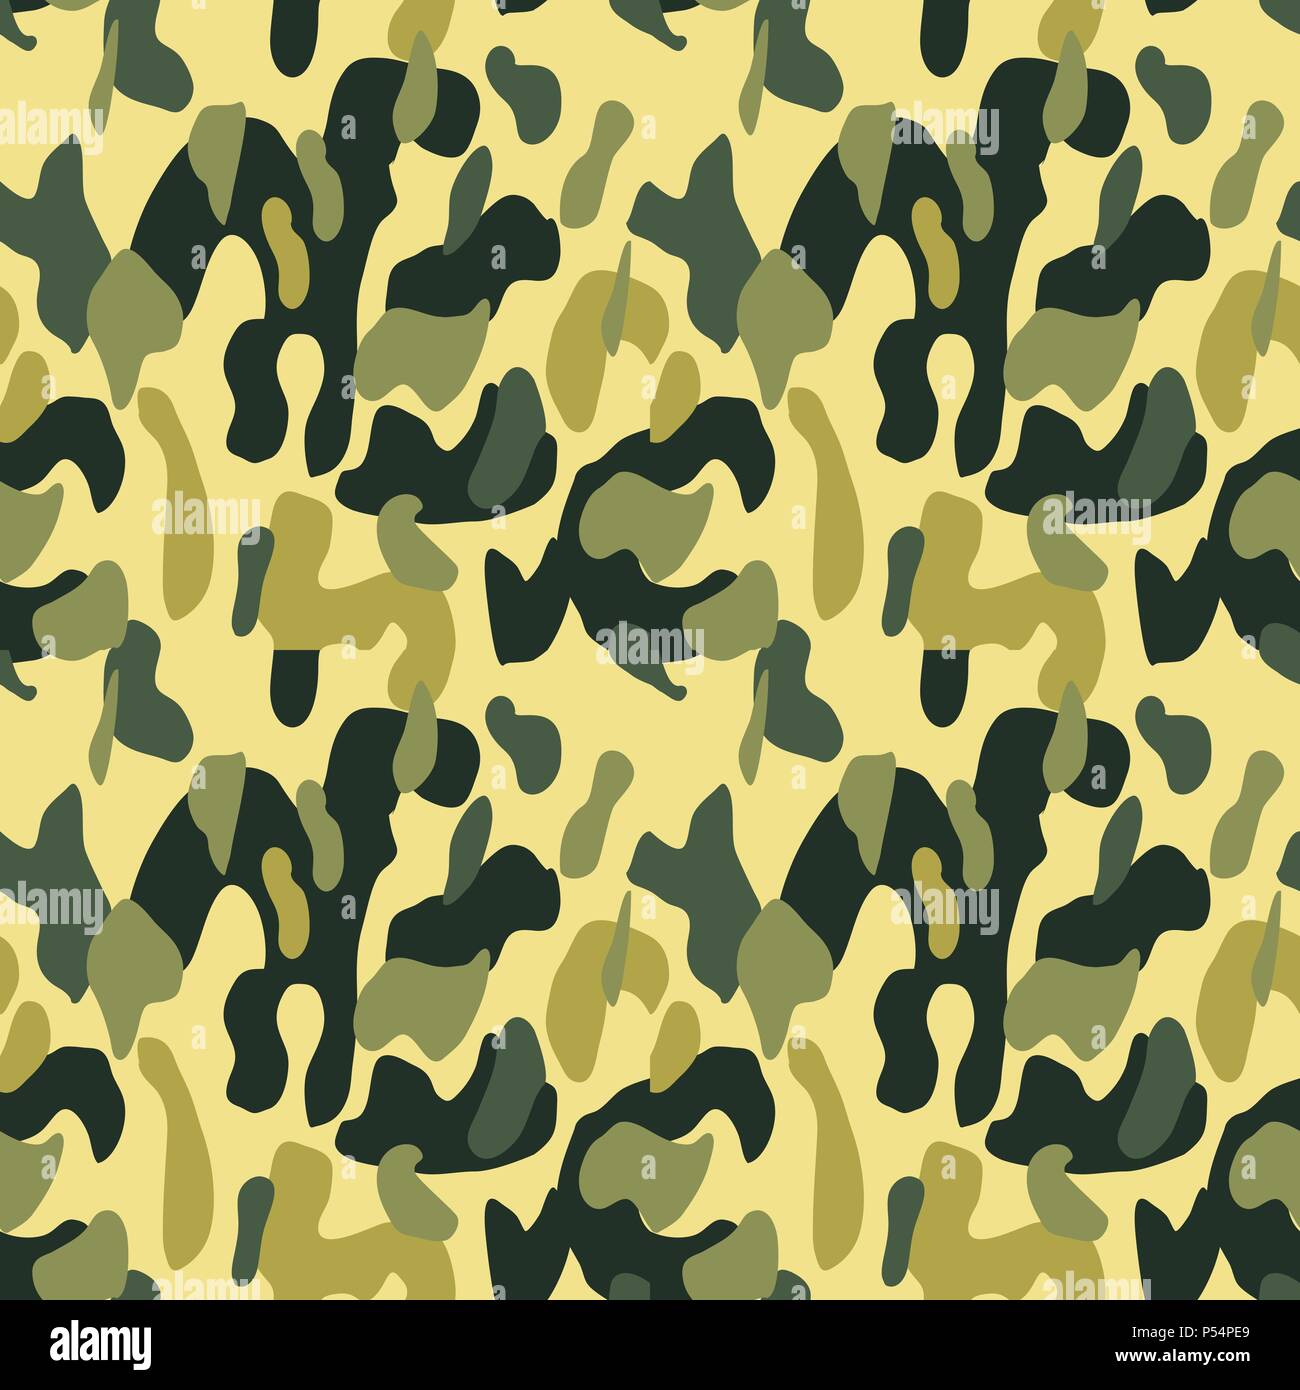 Camouflage pattern background seamless vector illustration. Classic military clothing style. Camo repeat texture shirt print. Khaki yellow black olive Stock Vector